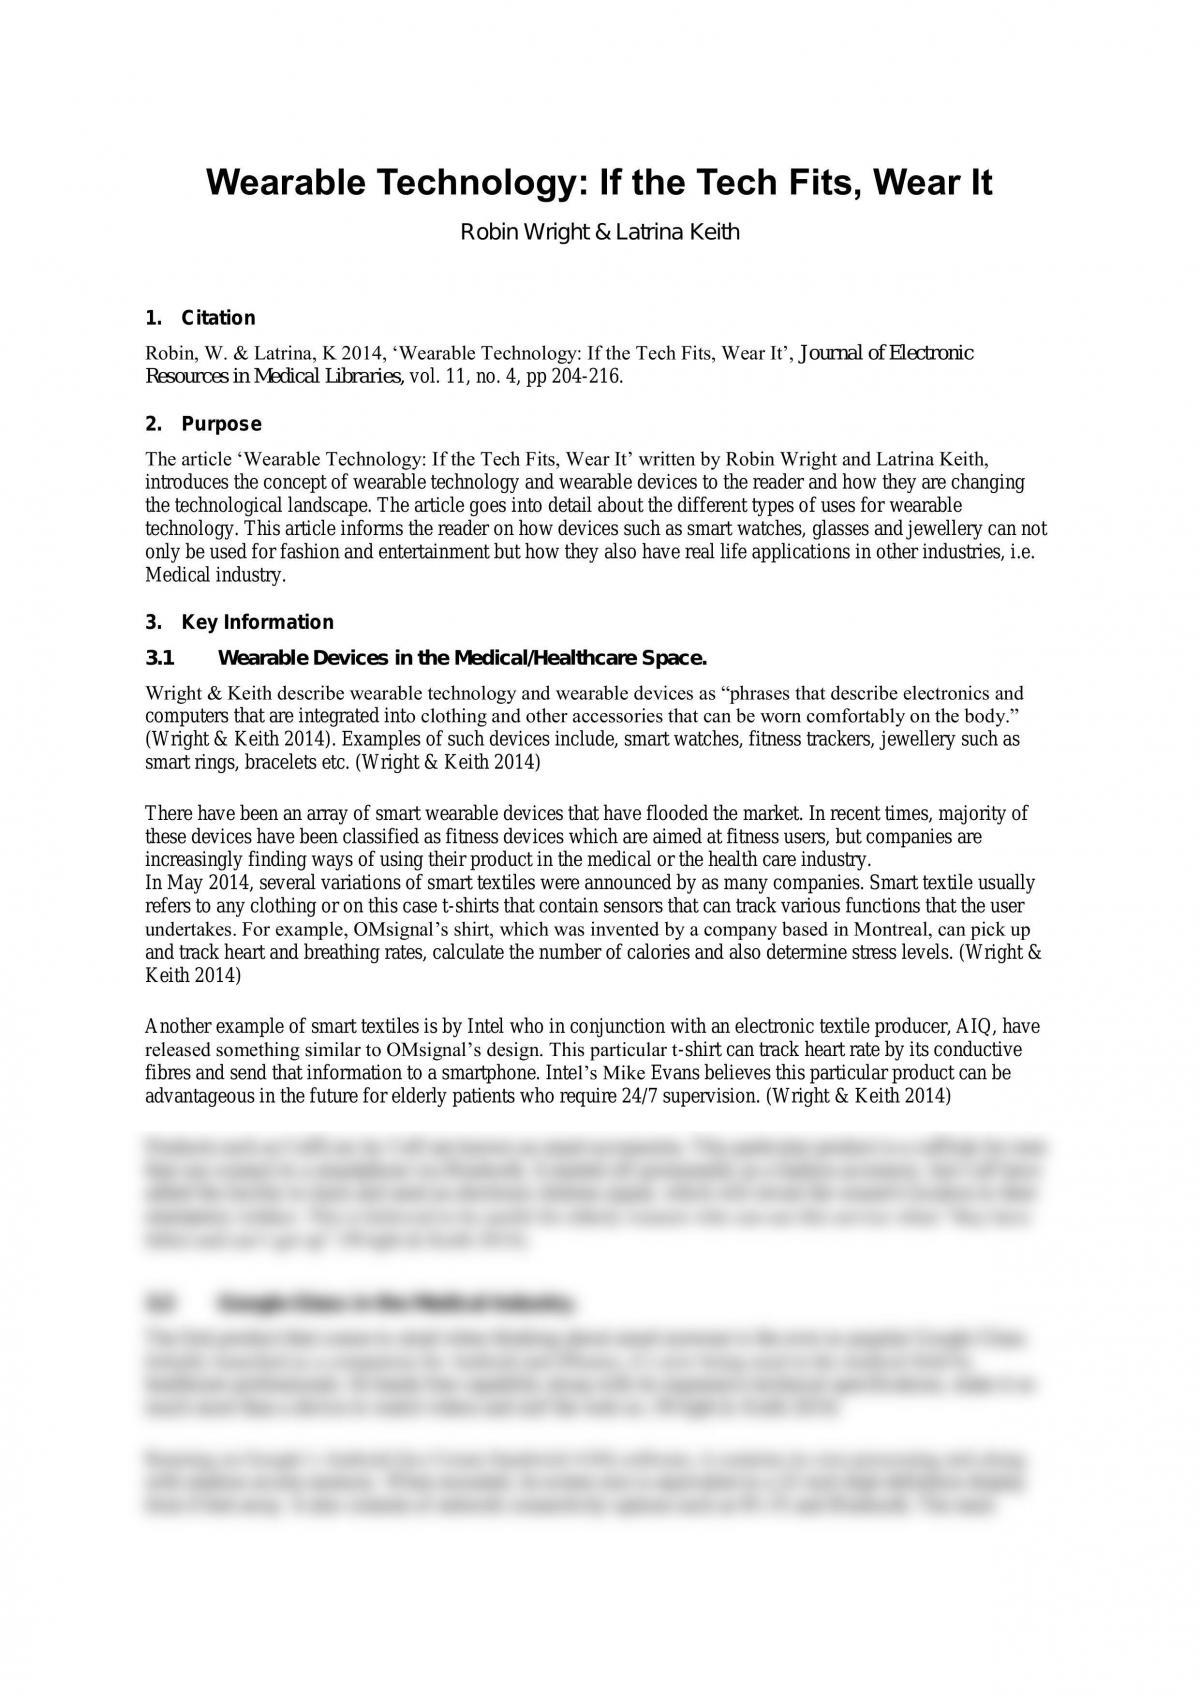 Article Review ENGG1805 - Page 1